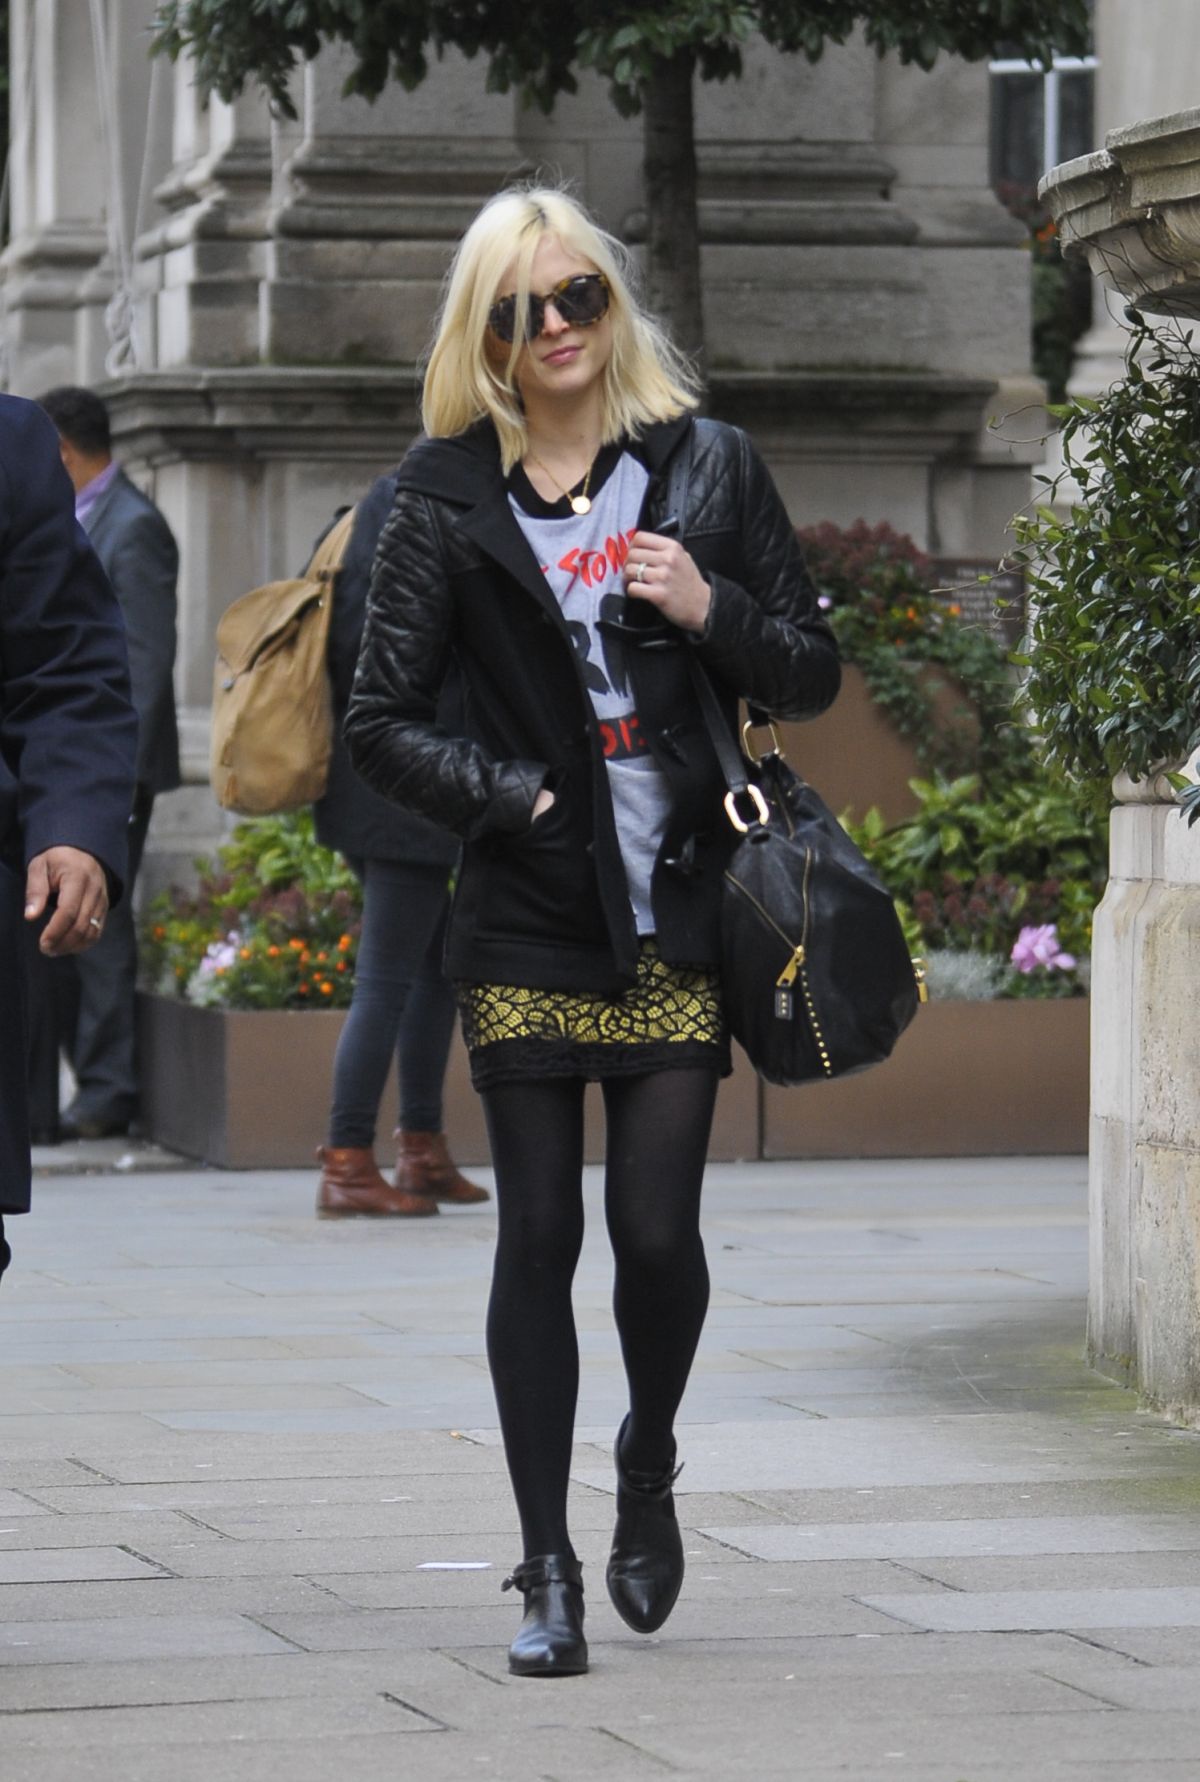 FEARNE COTTON Arrives at BBC Radio 1 Studios in London – HawtCelebs